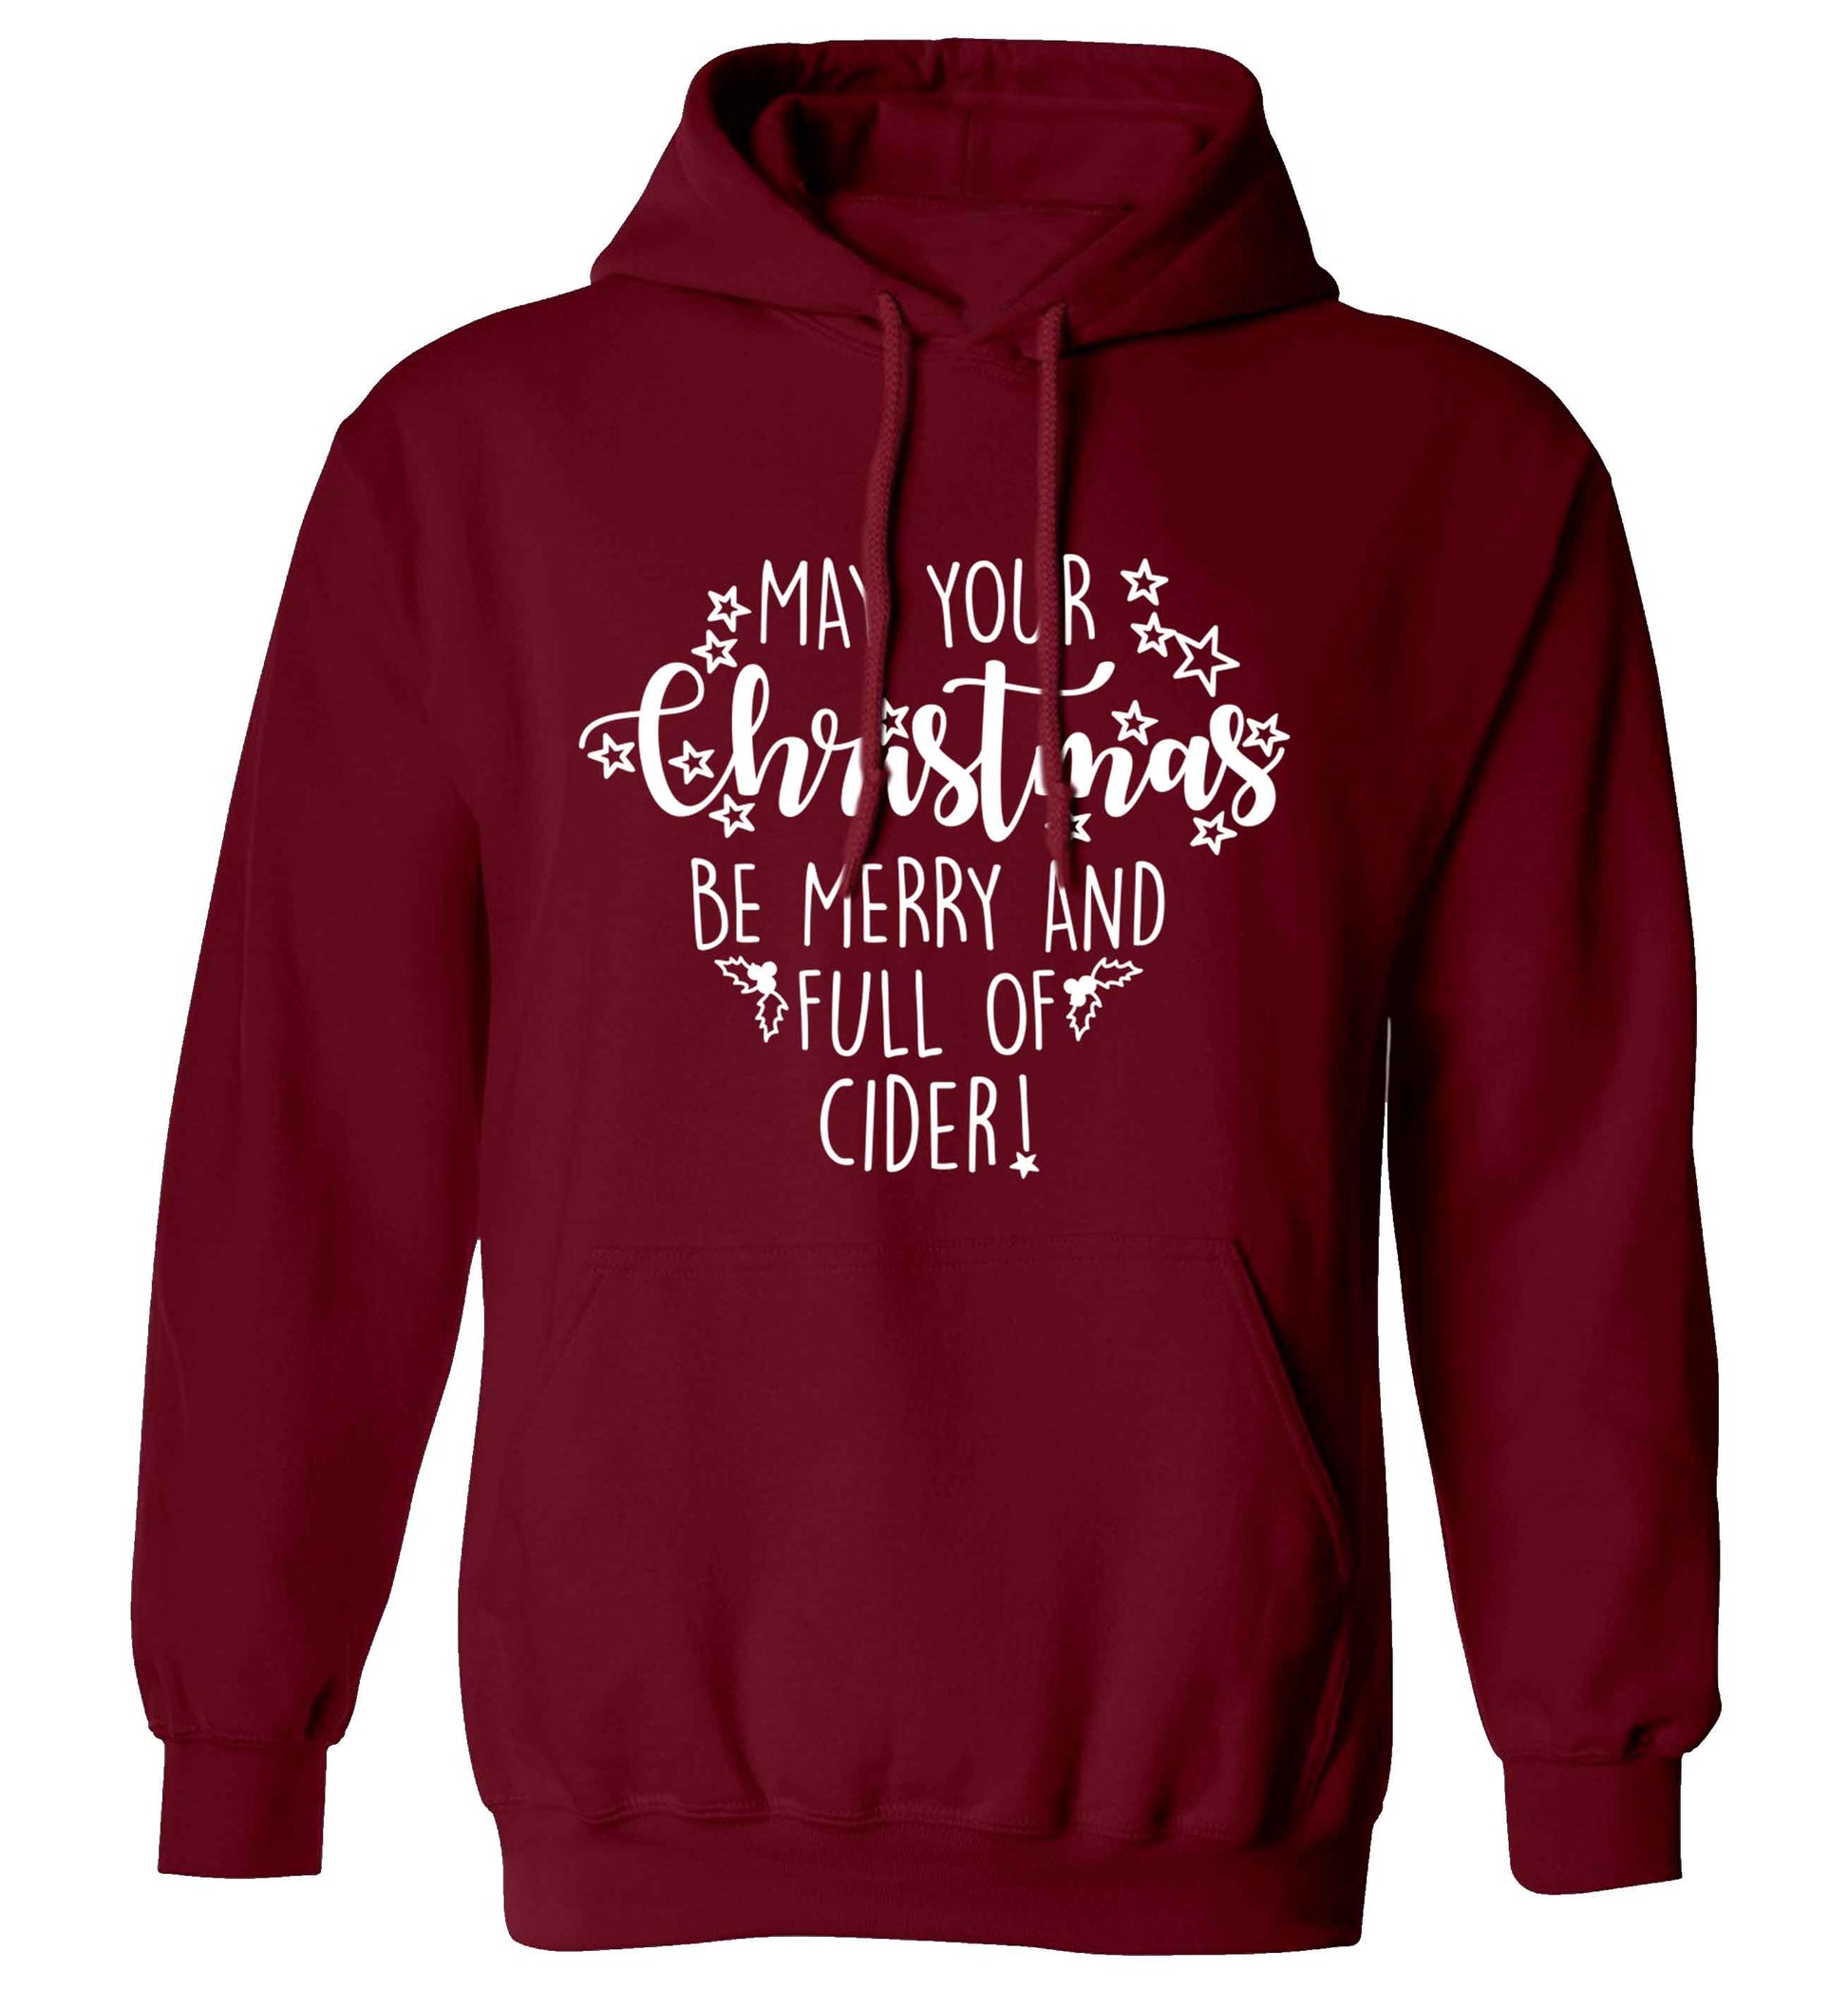 May your Christmas be merry and full of cider adults unisex maroon hoodie 2XL